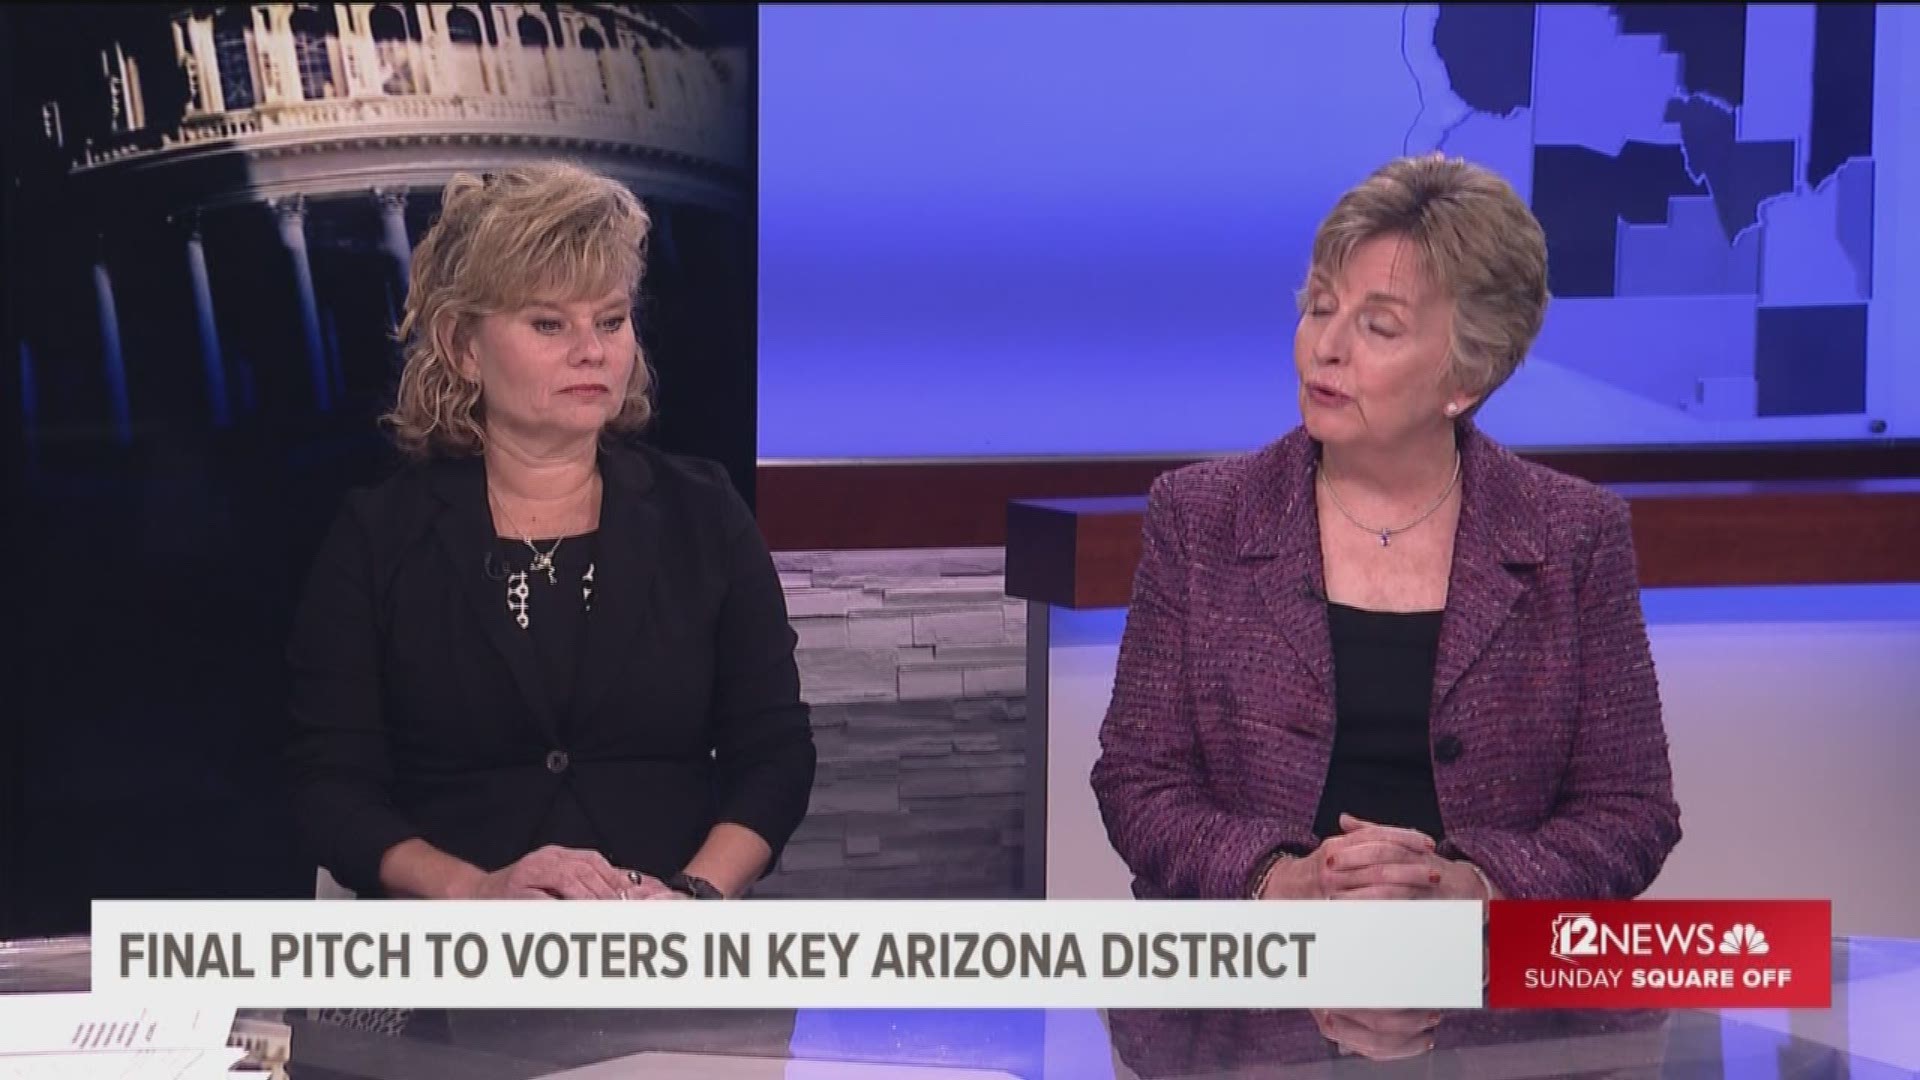 The state Legislature is expected to vote next year on a water deal that would reallocate Arizona's diminishing share of Lake Mead water. The LD 28 candidates explain what the deal would mean.